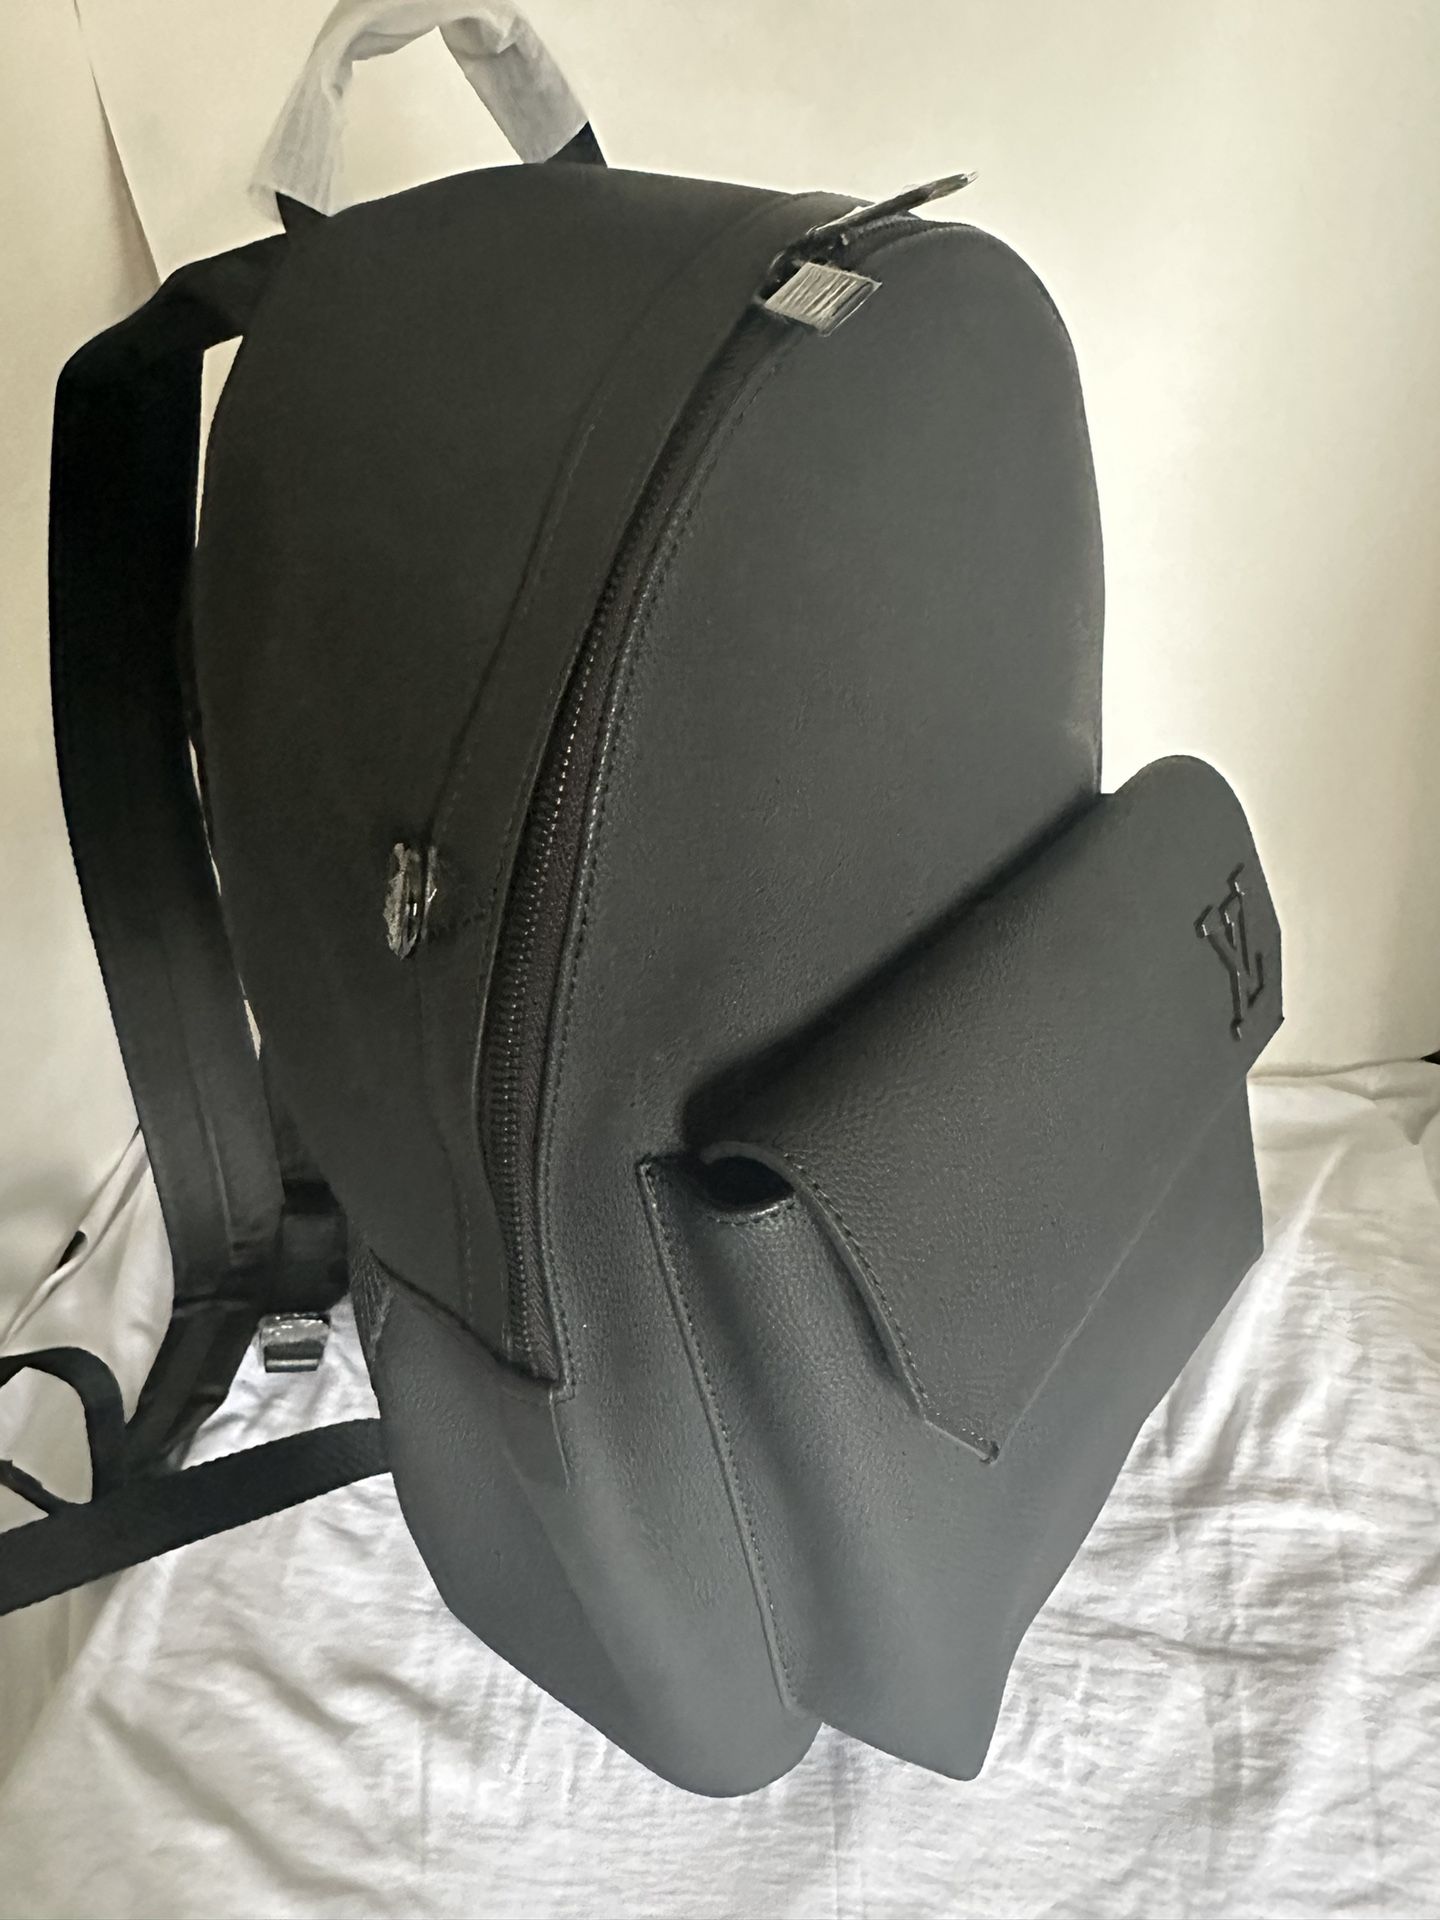 New Louis Vuitton Backpack !! for Sale in Chesapeake, VA - OfferUp